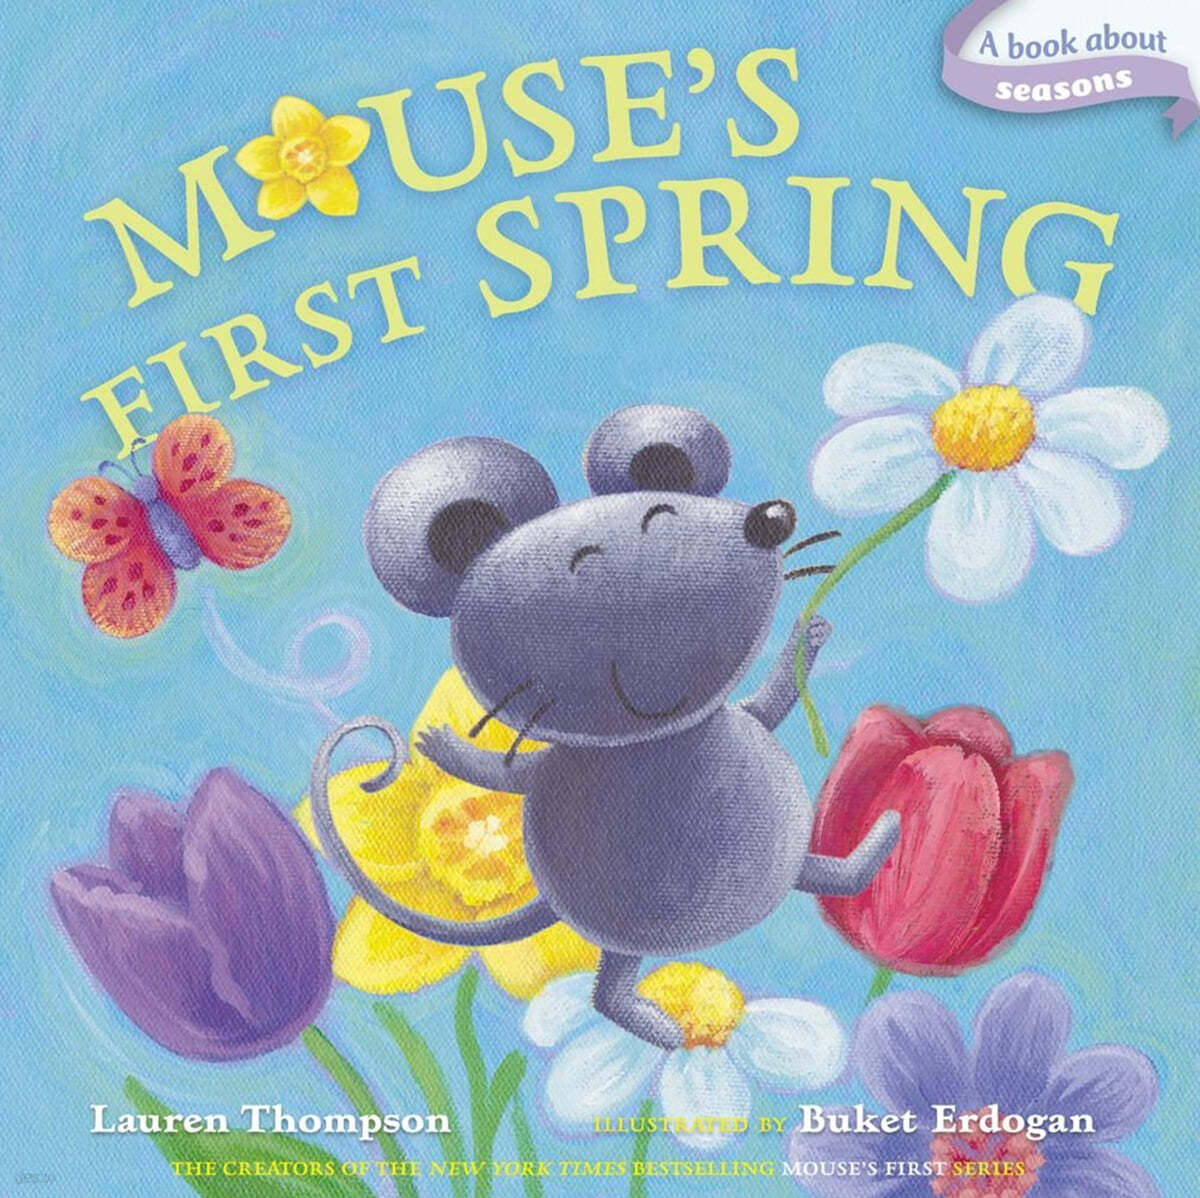 Mouse's first spring : a book about seasons